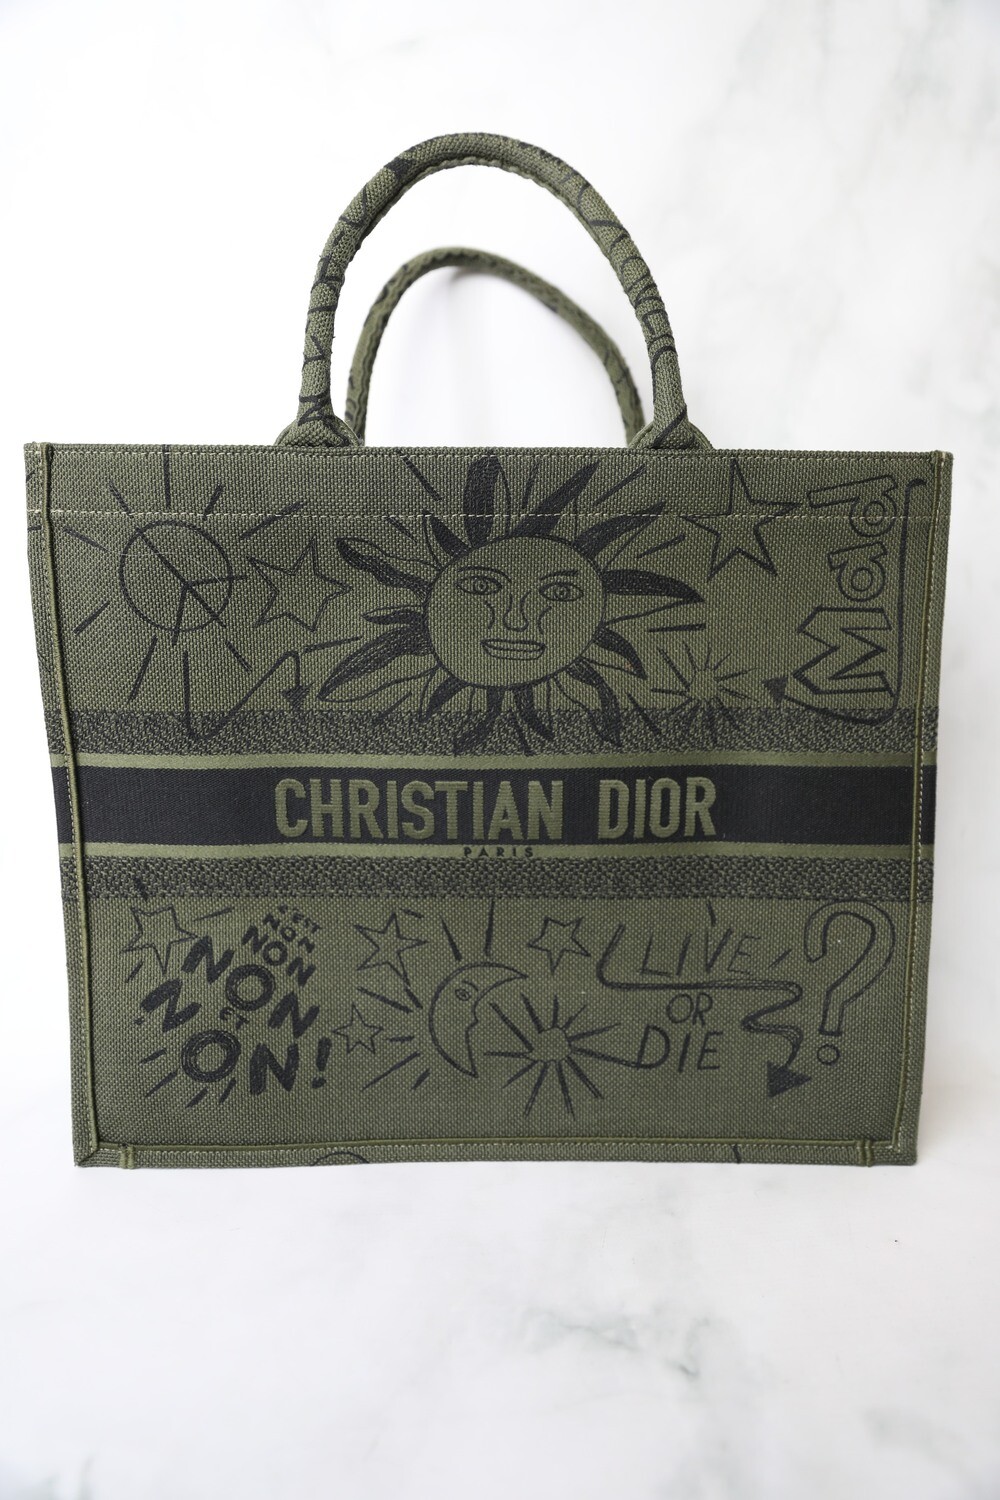 Dior Book Tote Large, Green with Scribbles, Preowned no Dustbag WA001